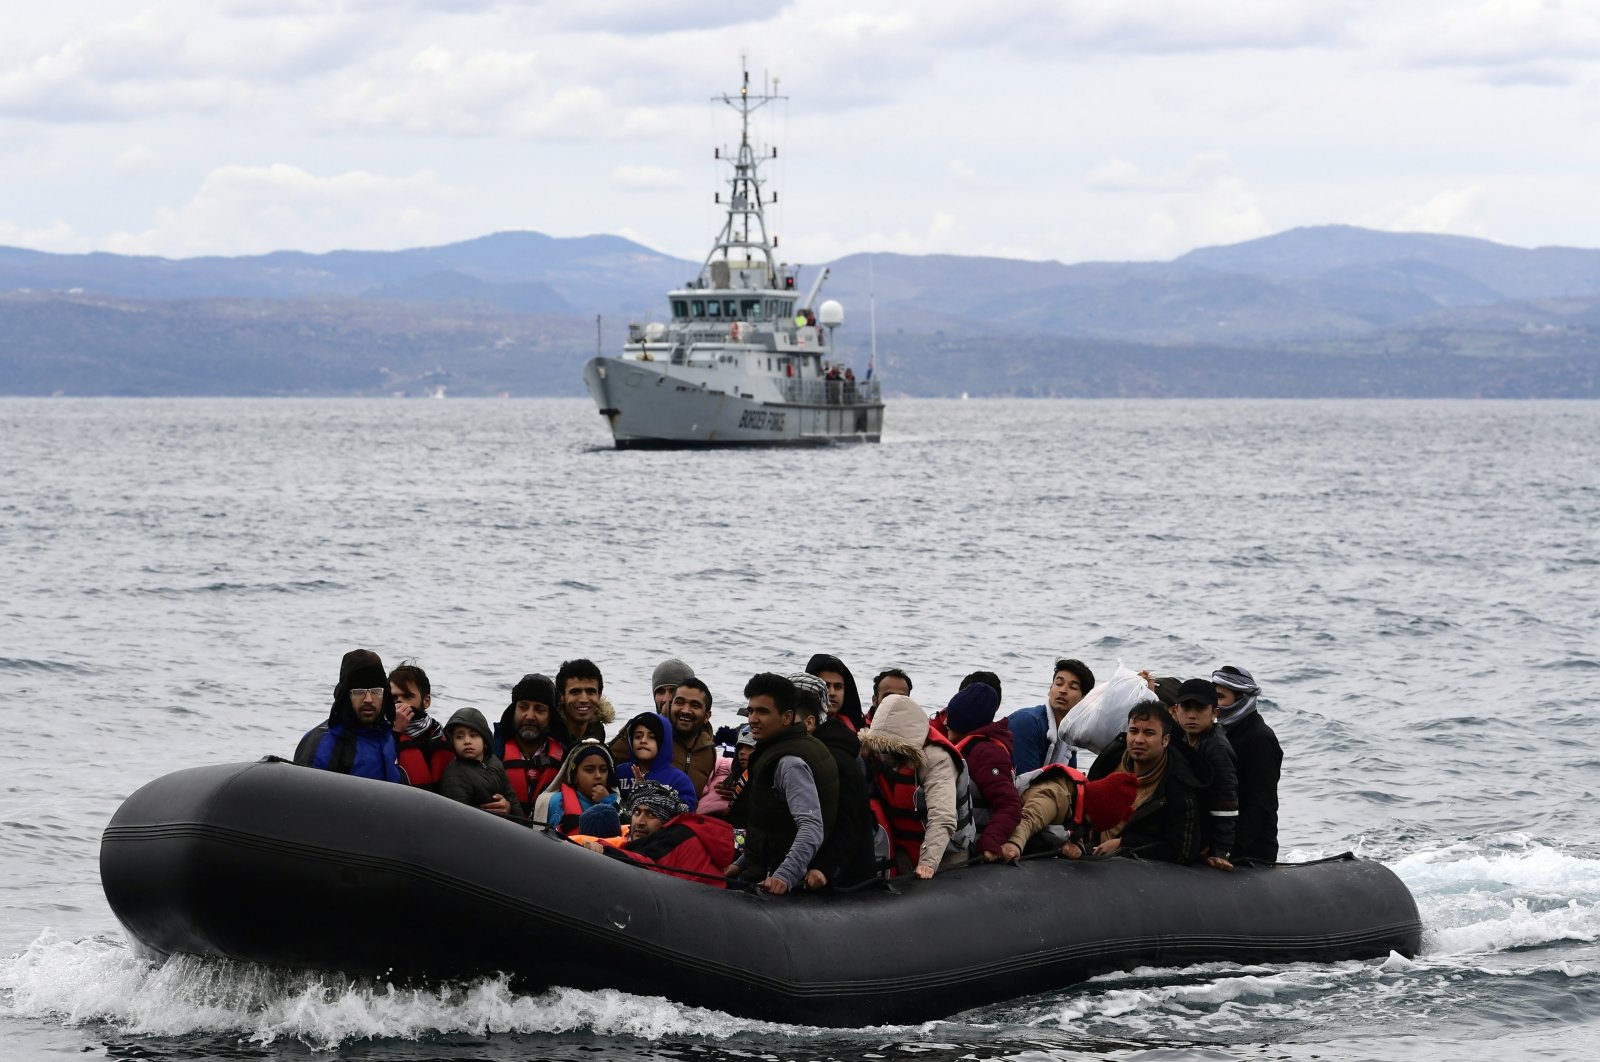 Migrants arrive with a dinghy accompanied by a Frontex vessel at the village of Skala Sikaminias, on the Greek island of Lesbos, after crossing the Aegean Sea from Turkey, Feb. 28, 2020. (AP Photo)